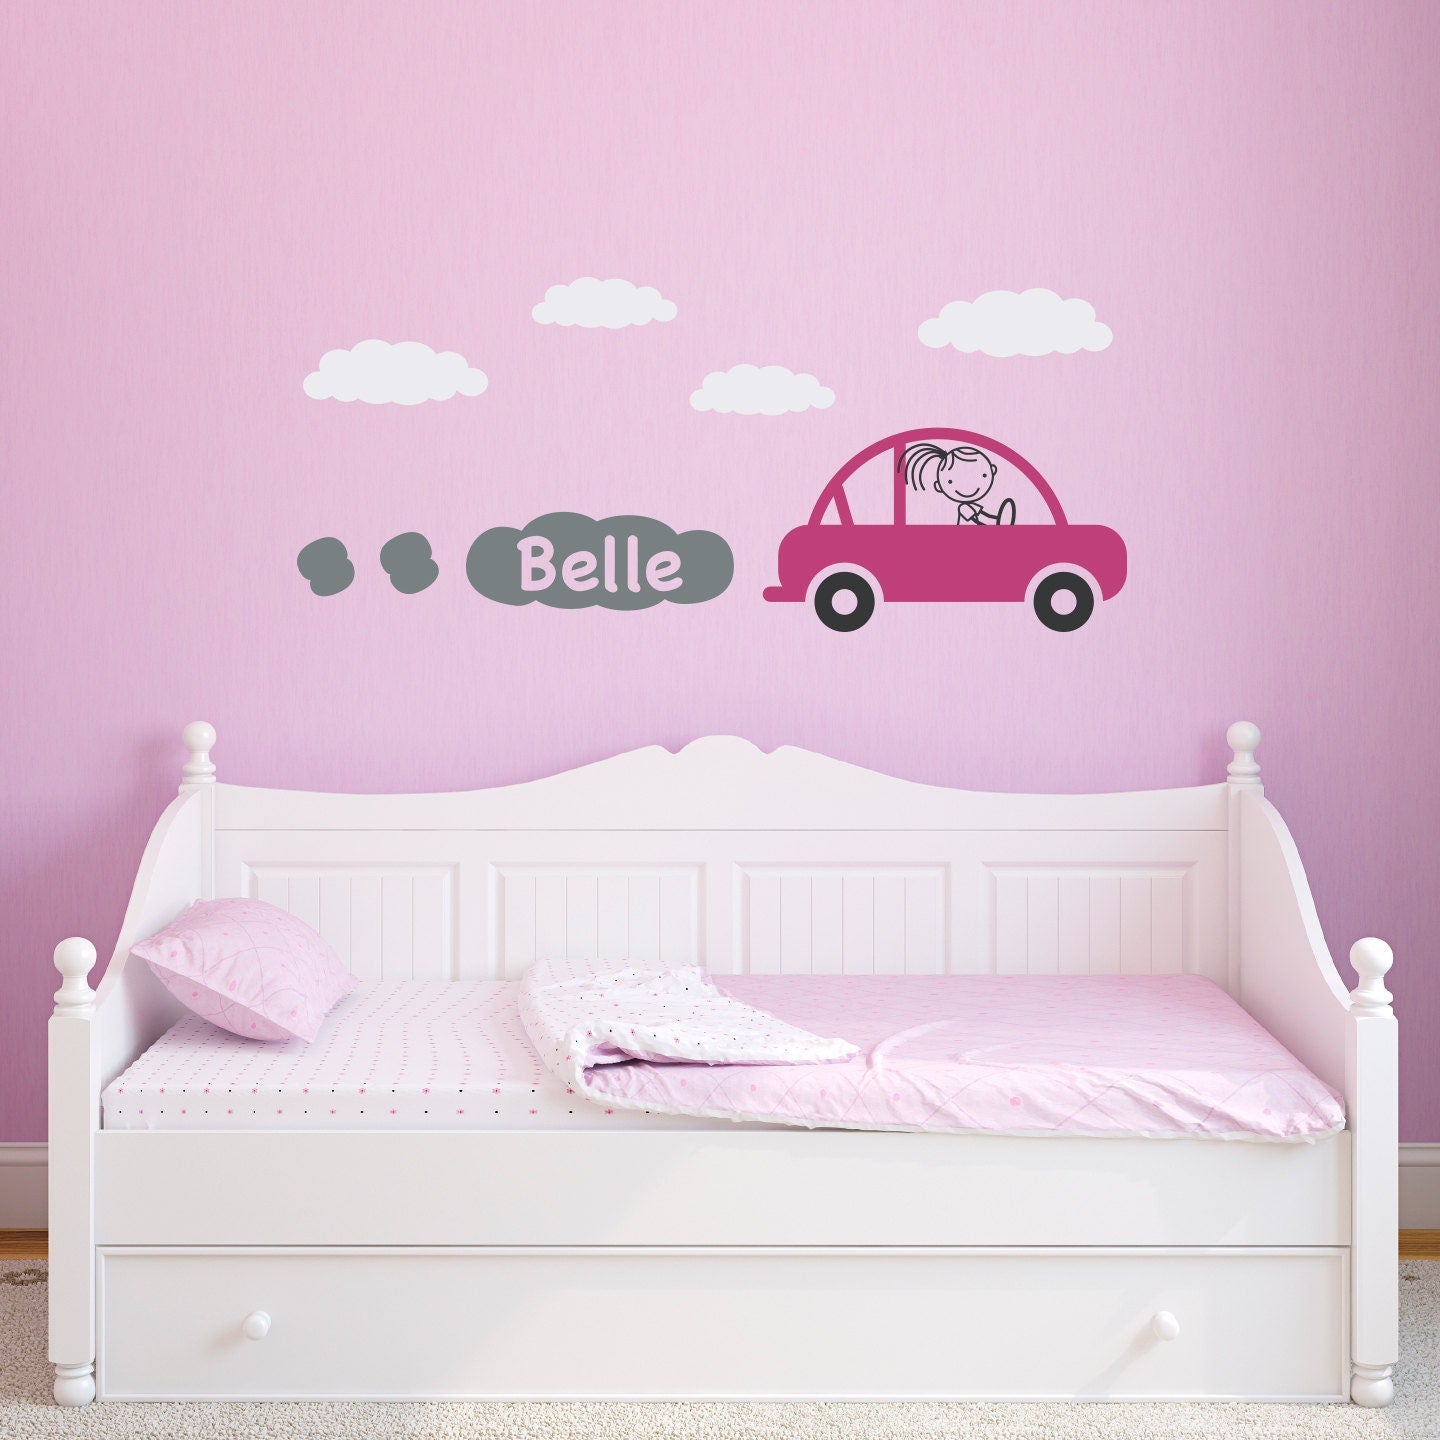 Car Wall Decal with Custom Girls Name - Girl Bedroom Wall Sticker - Personalized Children Wall Decals